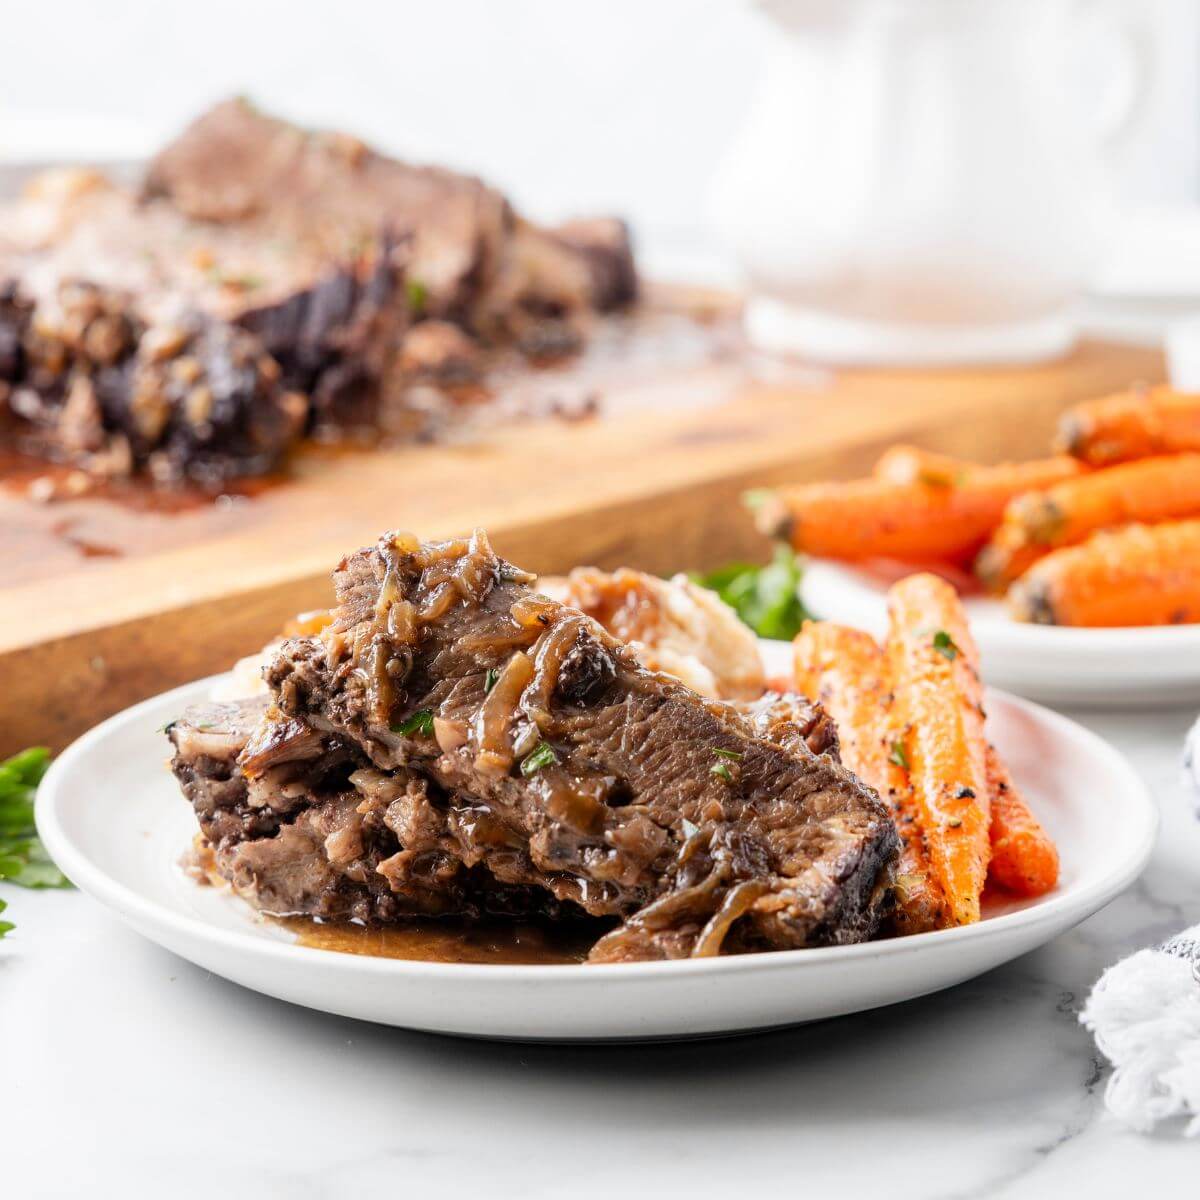 Meat with gravy and cooked carrots are shown next to full board of brisket and carrots.